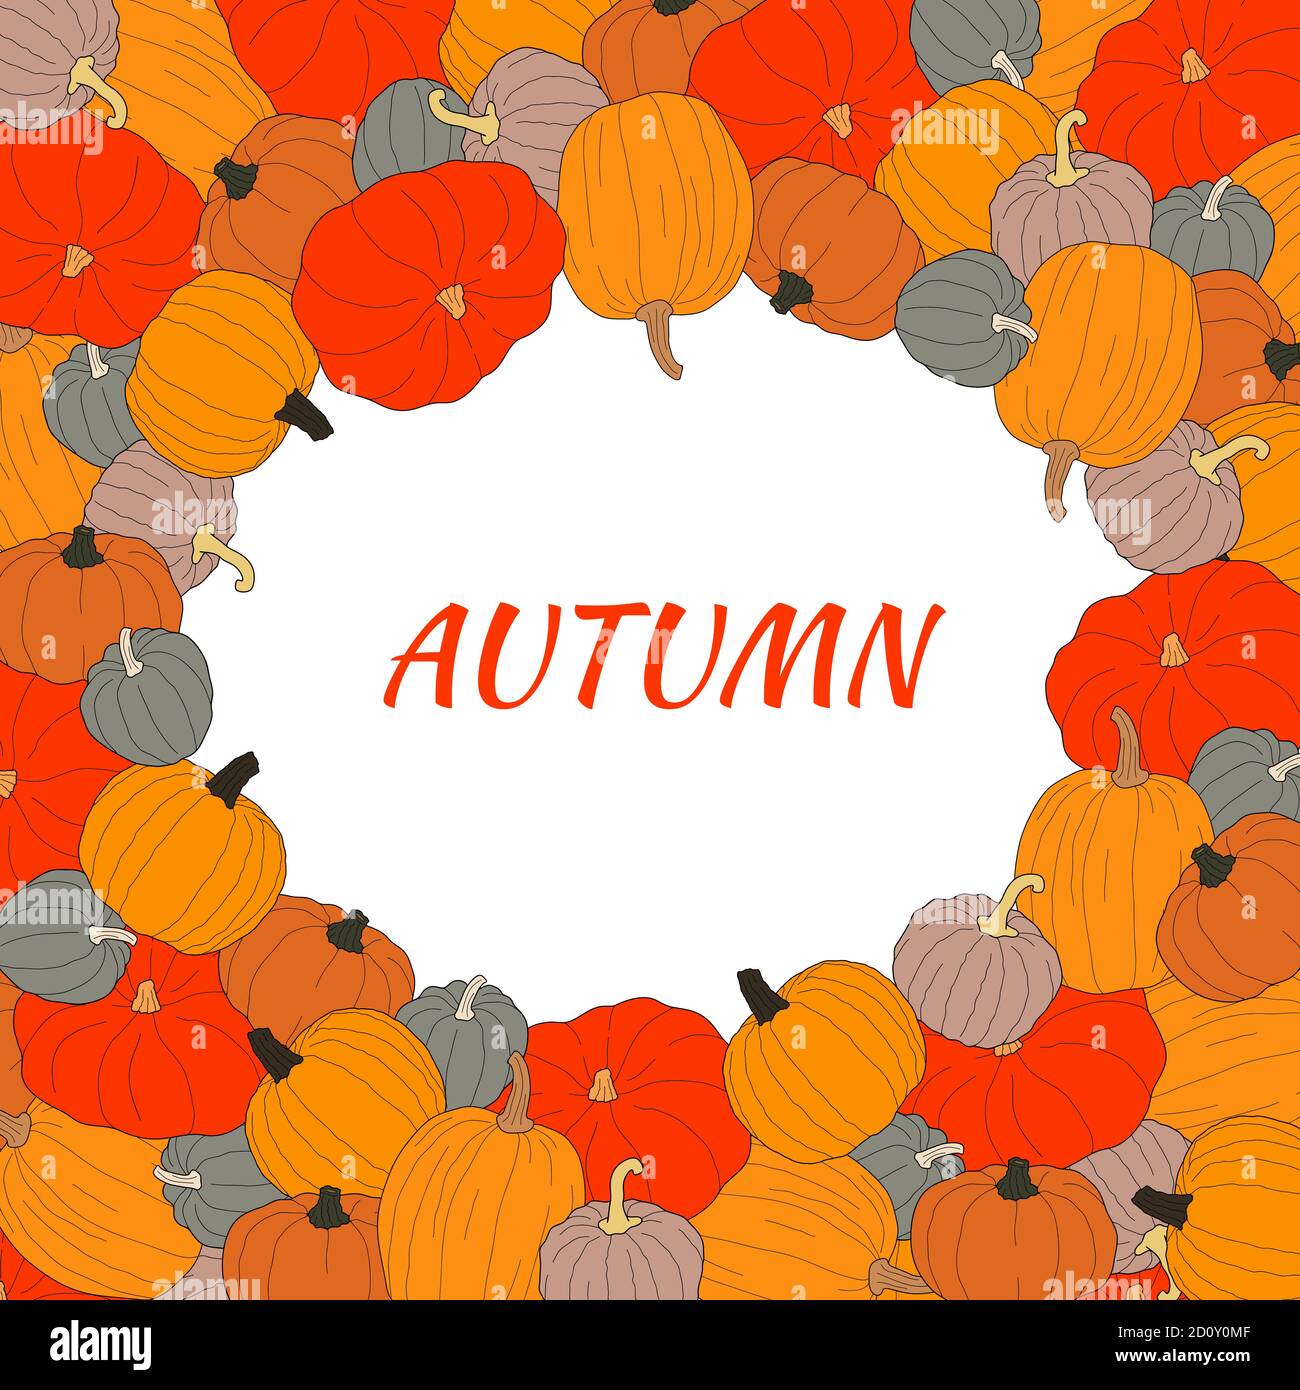 Autumn text vector banner with colorful pumpkins on transparent background. Vector illustration on doodle style. Decoration for greeting cards, poster Stock Vector